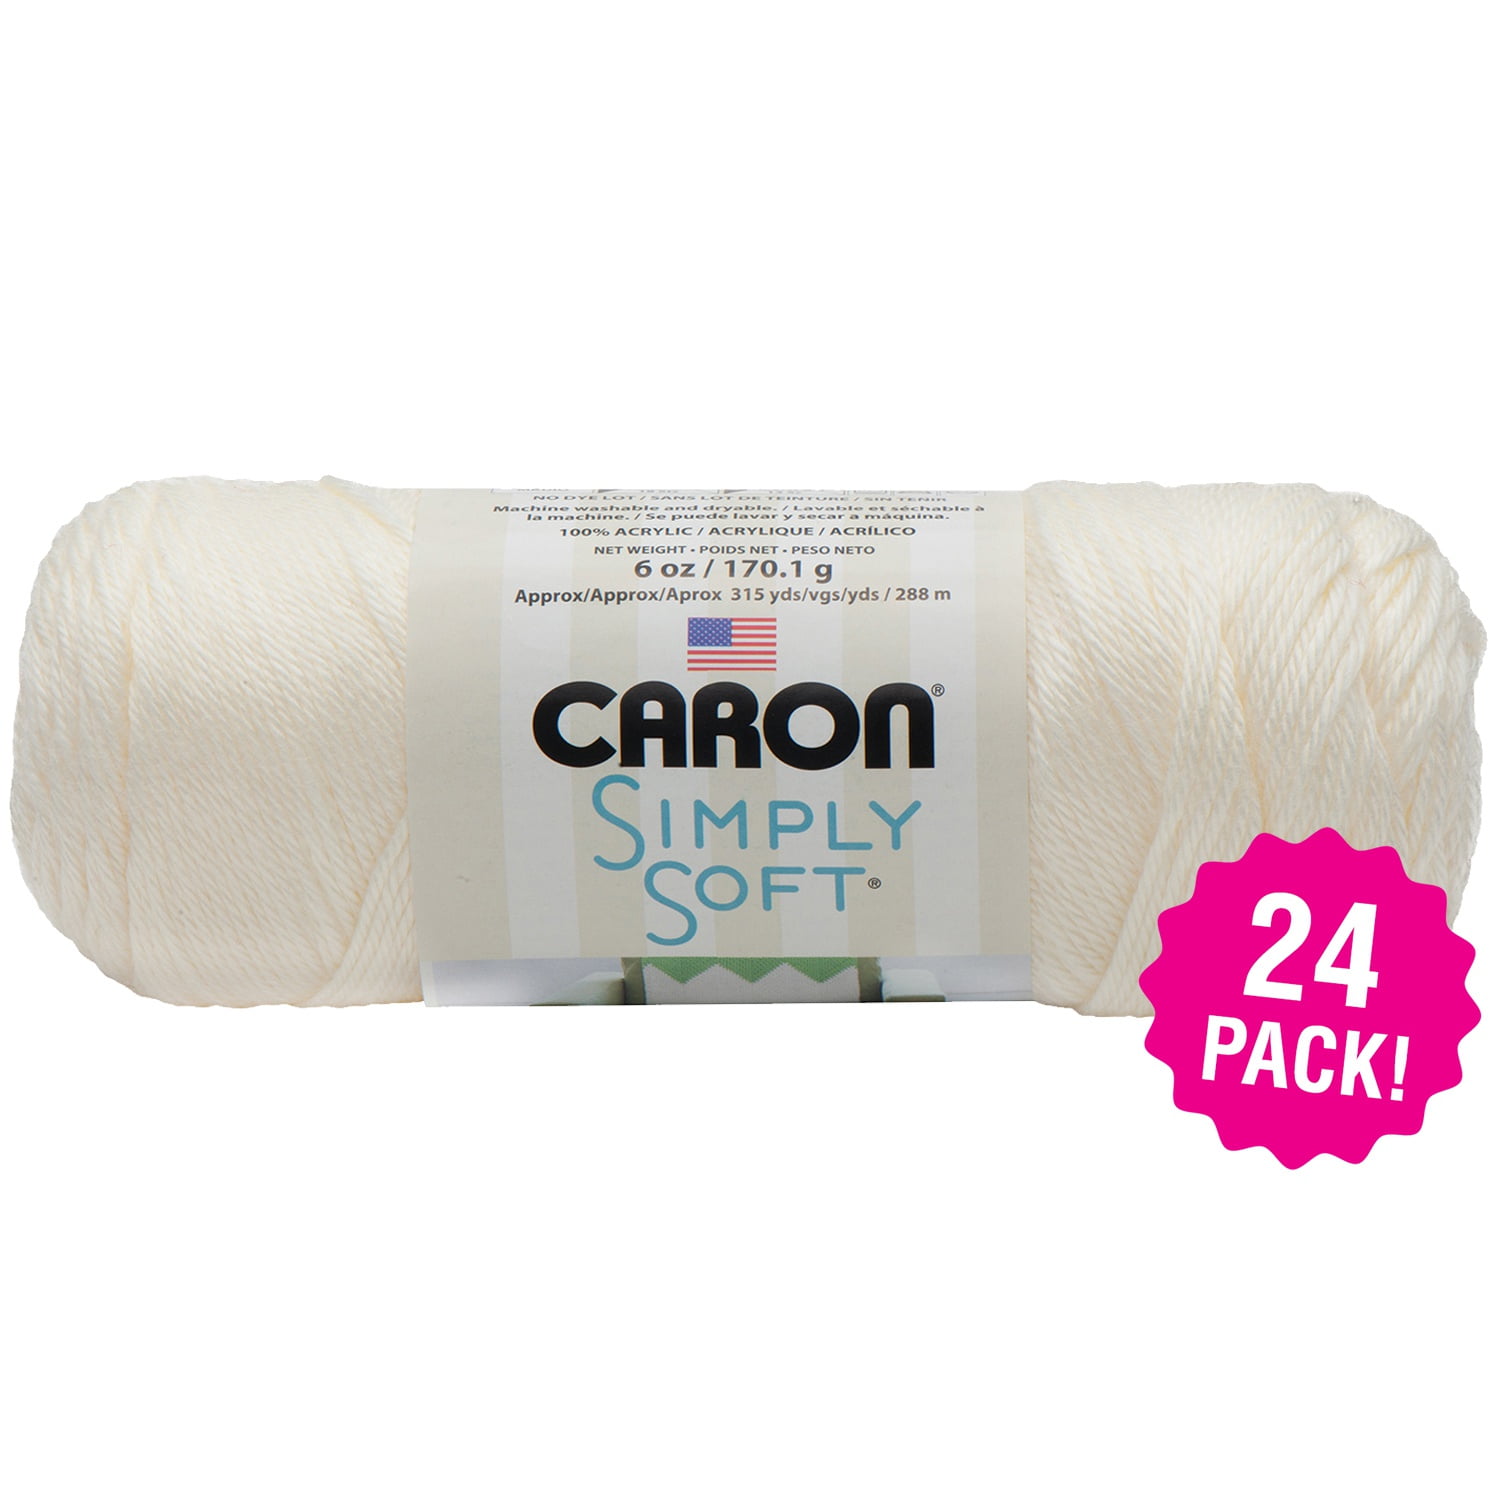 Caron Simply Soft Solids Yarns - Taupe, Multipack Of 6 - 9398761